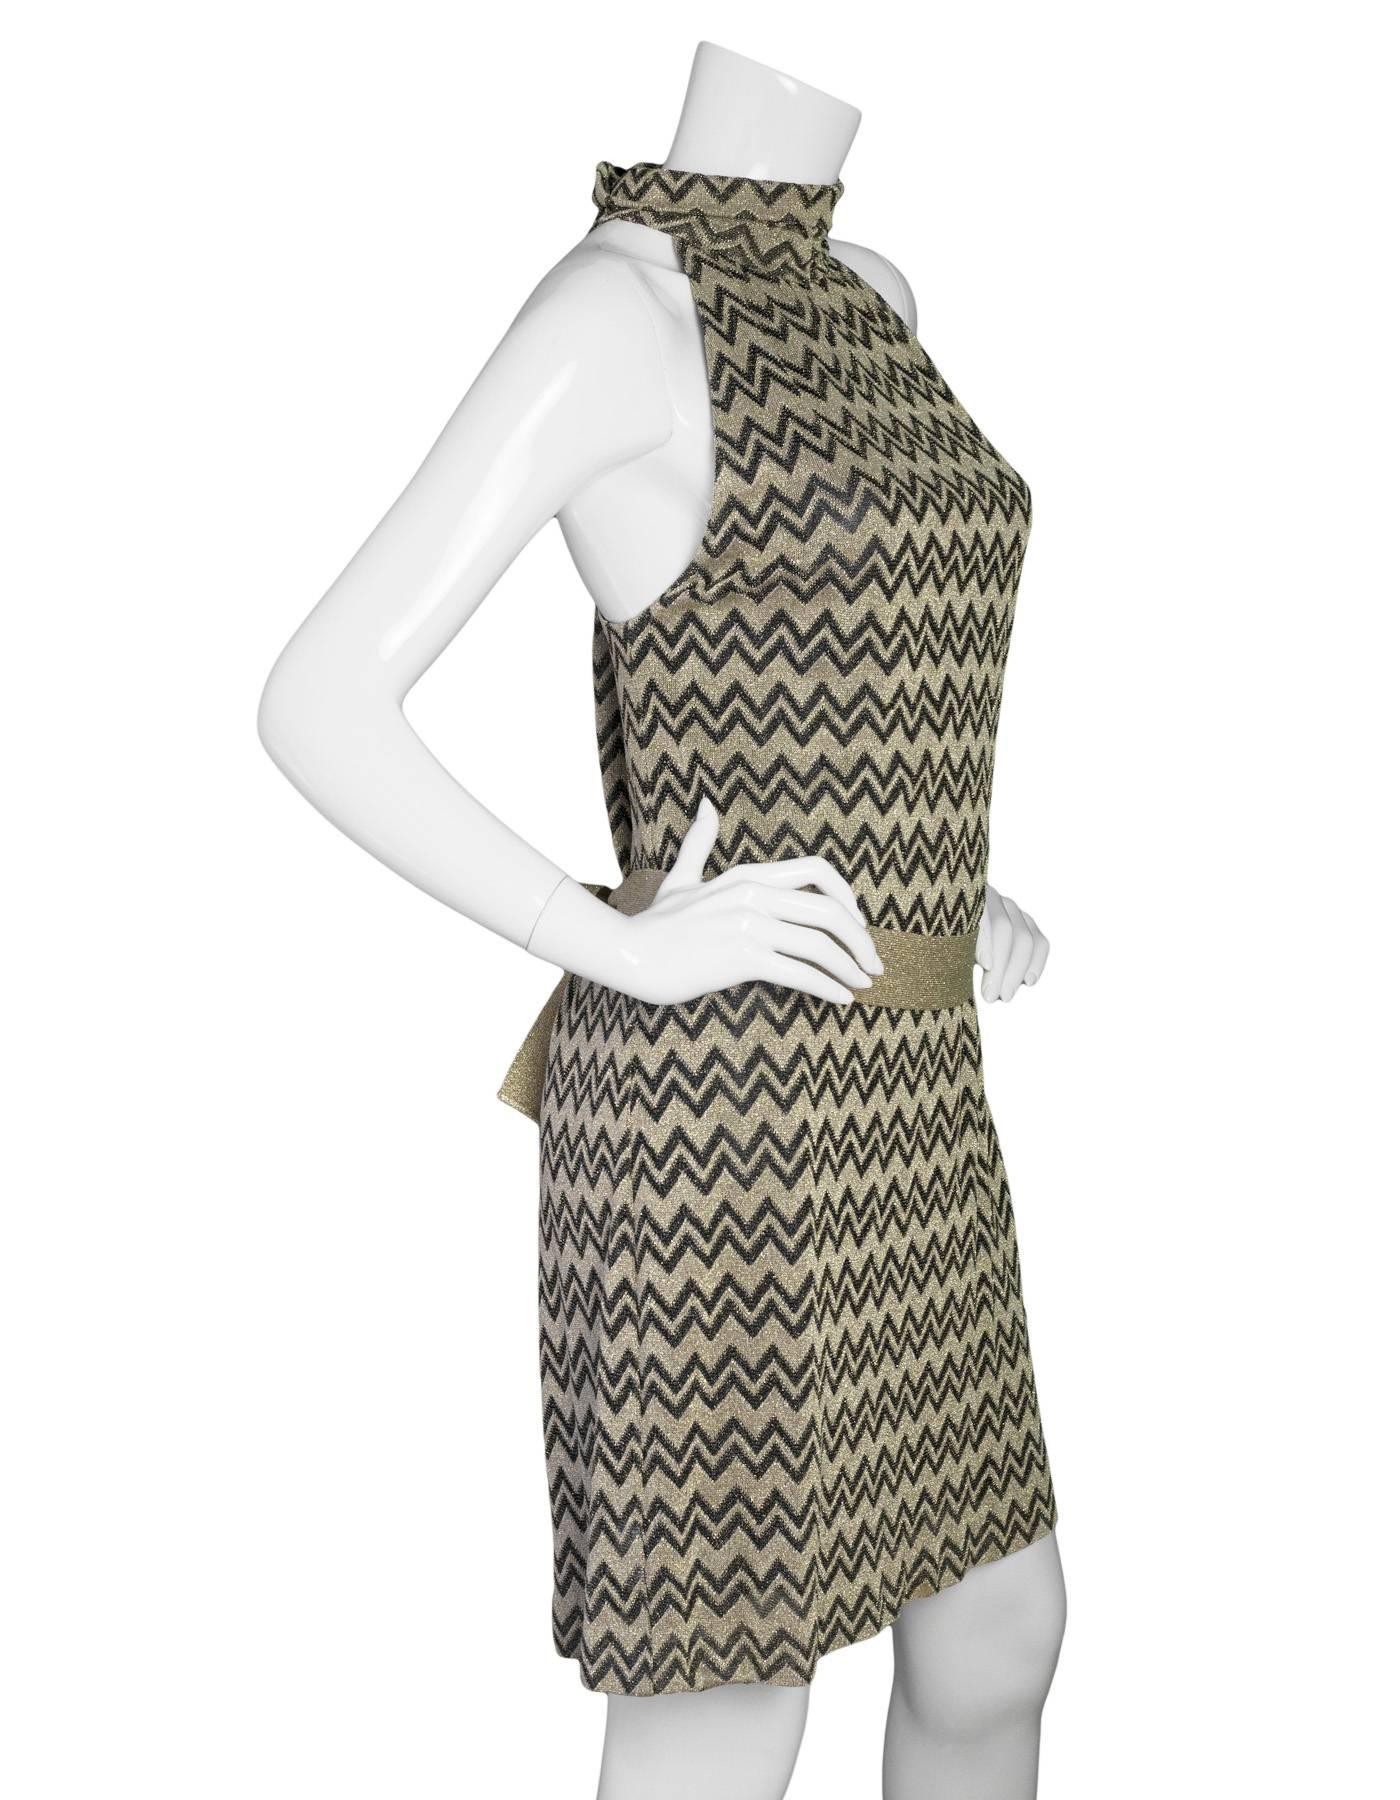 M Missoni Black & Gold Chevron Knit Shift Dress
Features waist tie

Made In: Italy
Color: Black and gold
Composition: 37% viscose, 35% cupro, 19% polyester, 9% polyamide
Lining: Black, 100% polyamide
Closure/Opening: Buttons at back